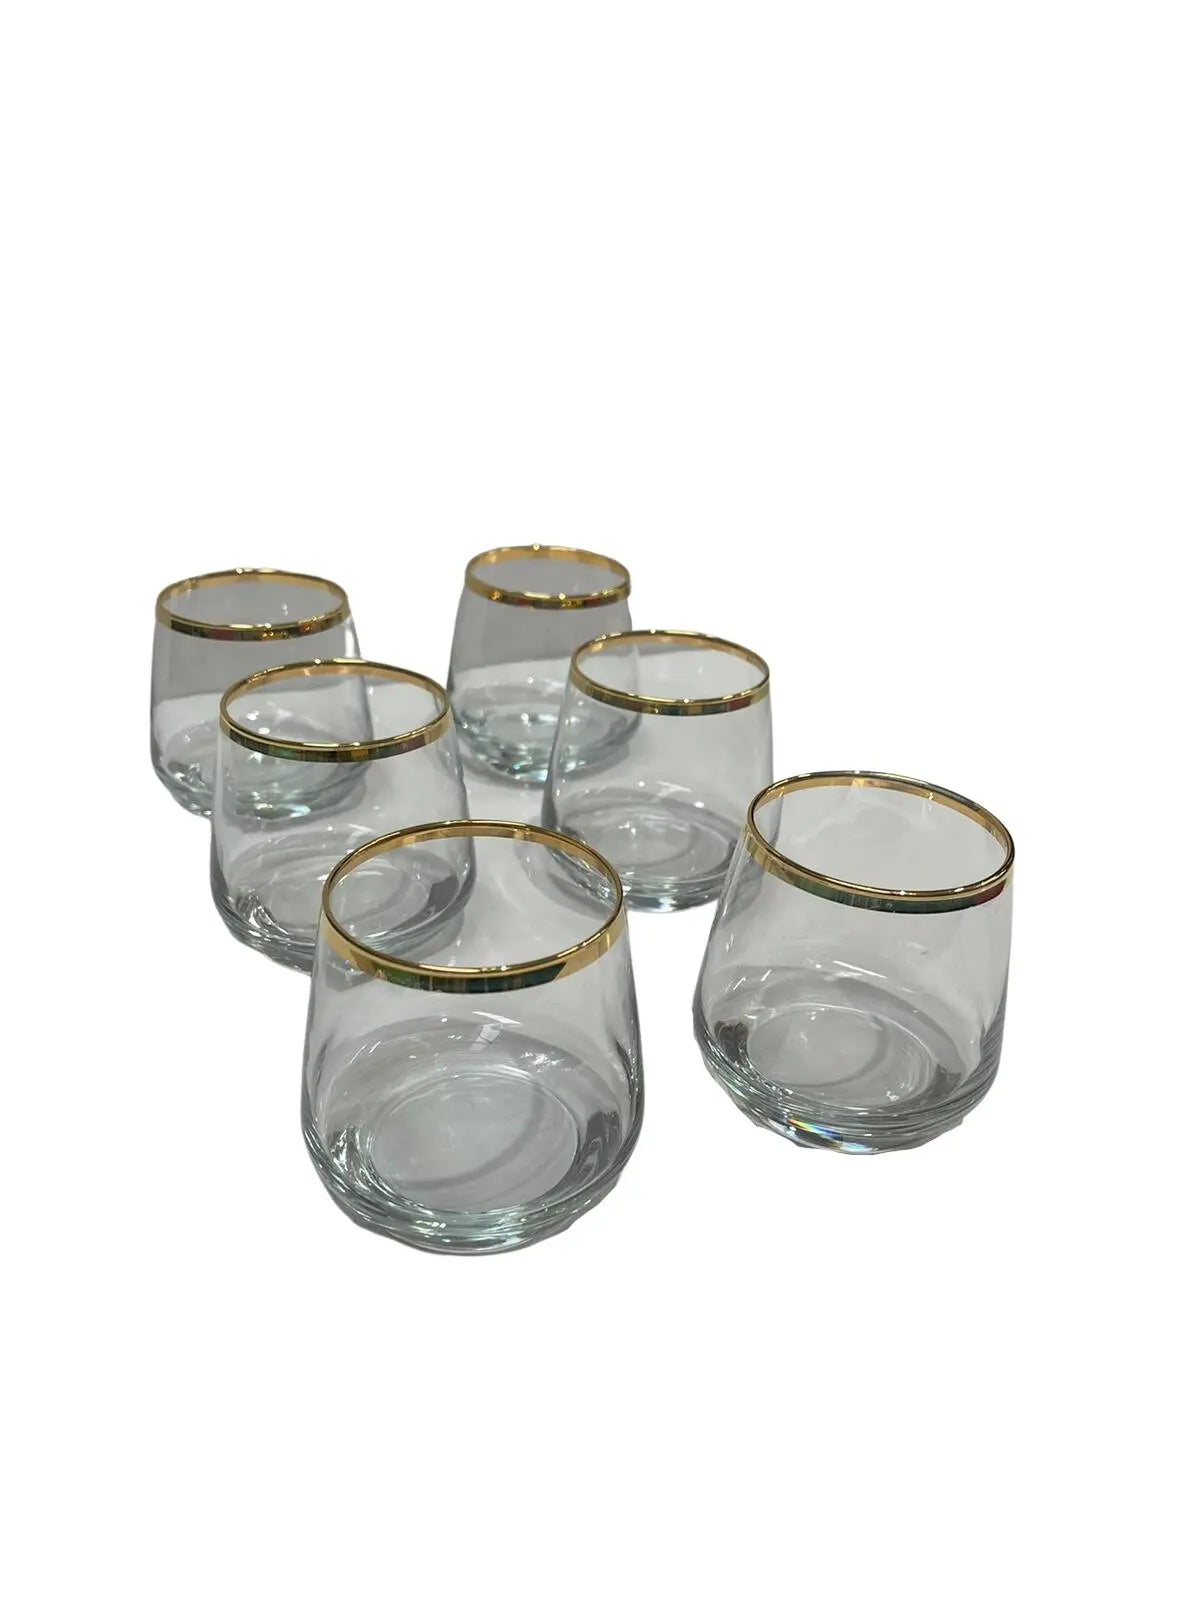 Clear Drinking Glass Set Round Base Patterned and Thick Gold Band 6pcs LAL361 -  Armani Gallery -  Armani Gallery